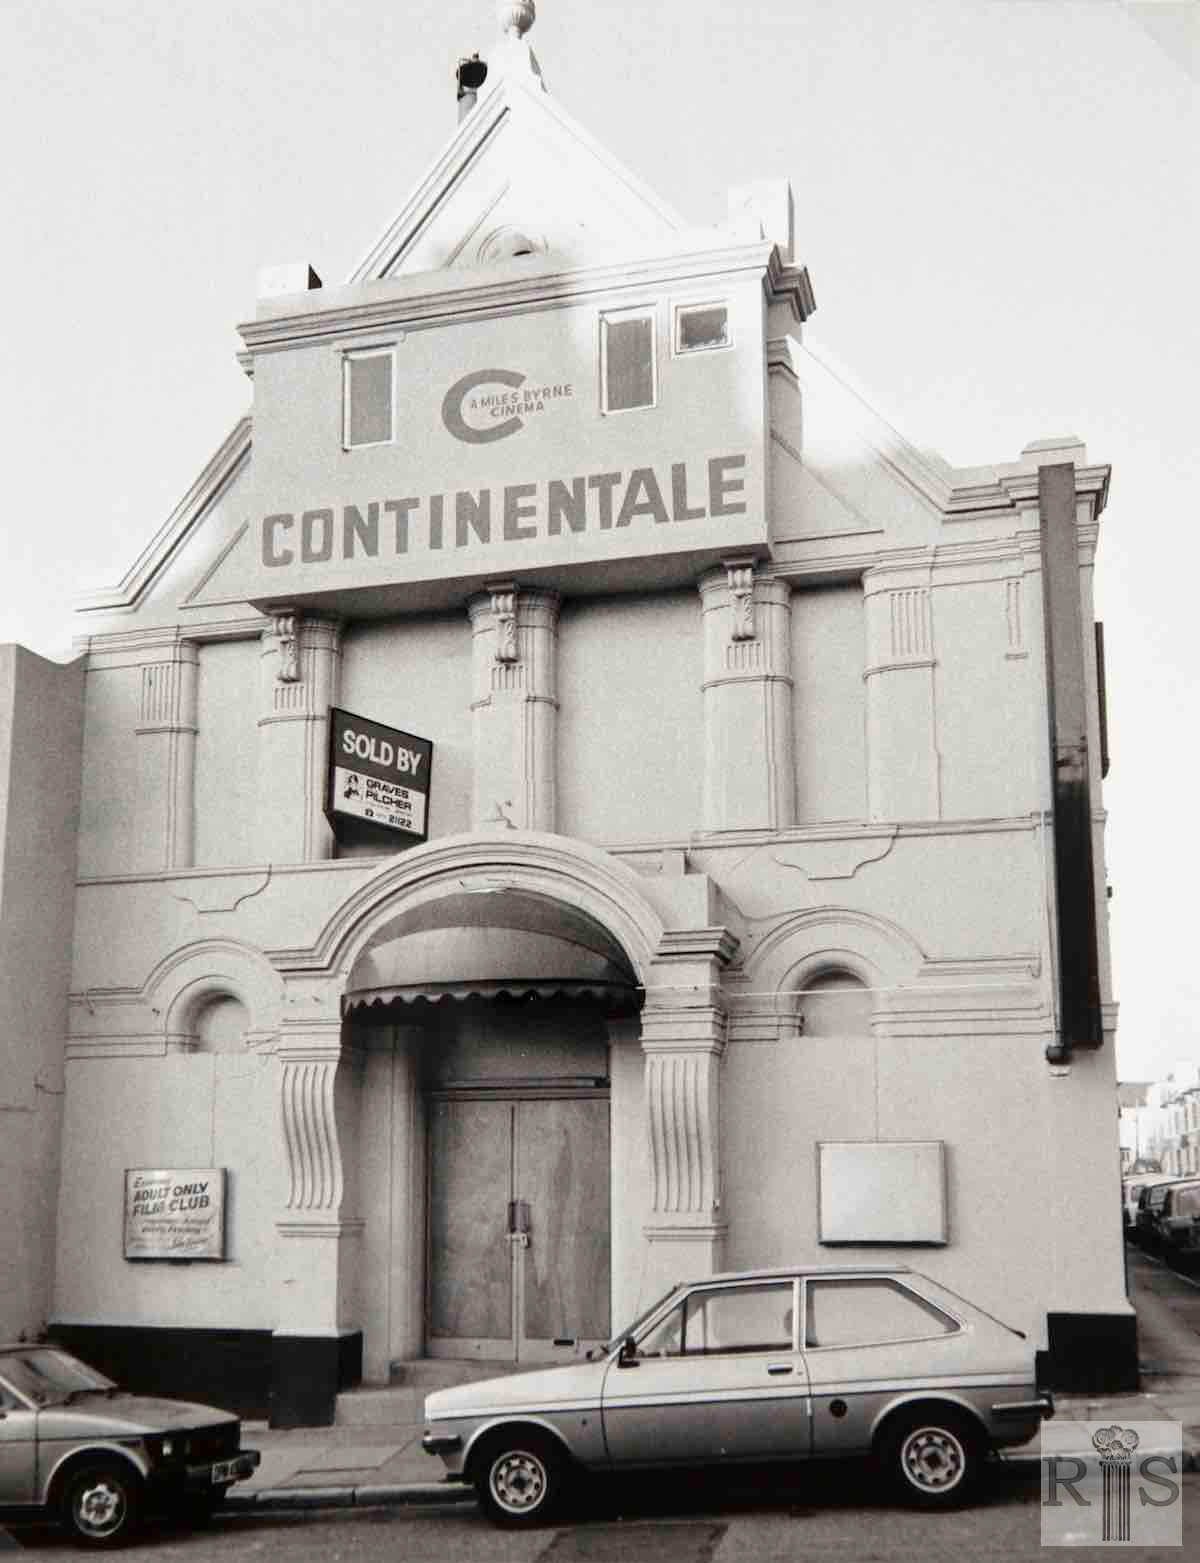 CINEMAS IN KEMP TOWN – THE CONTINENTALE